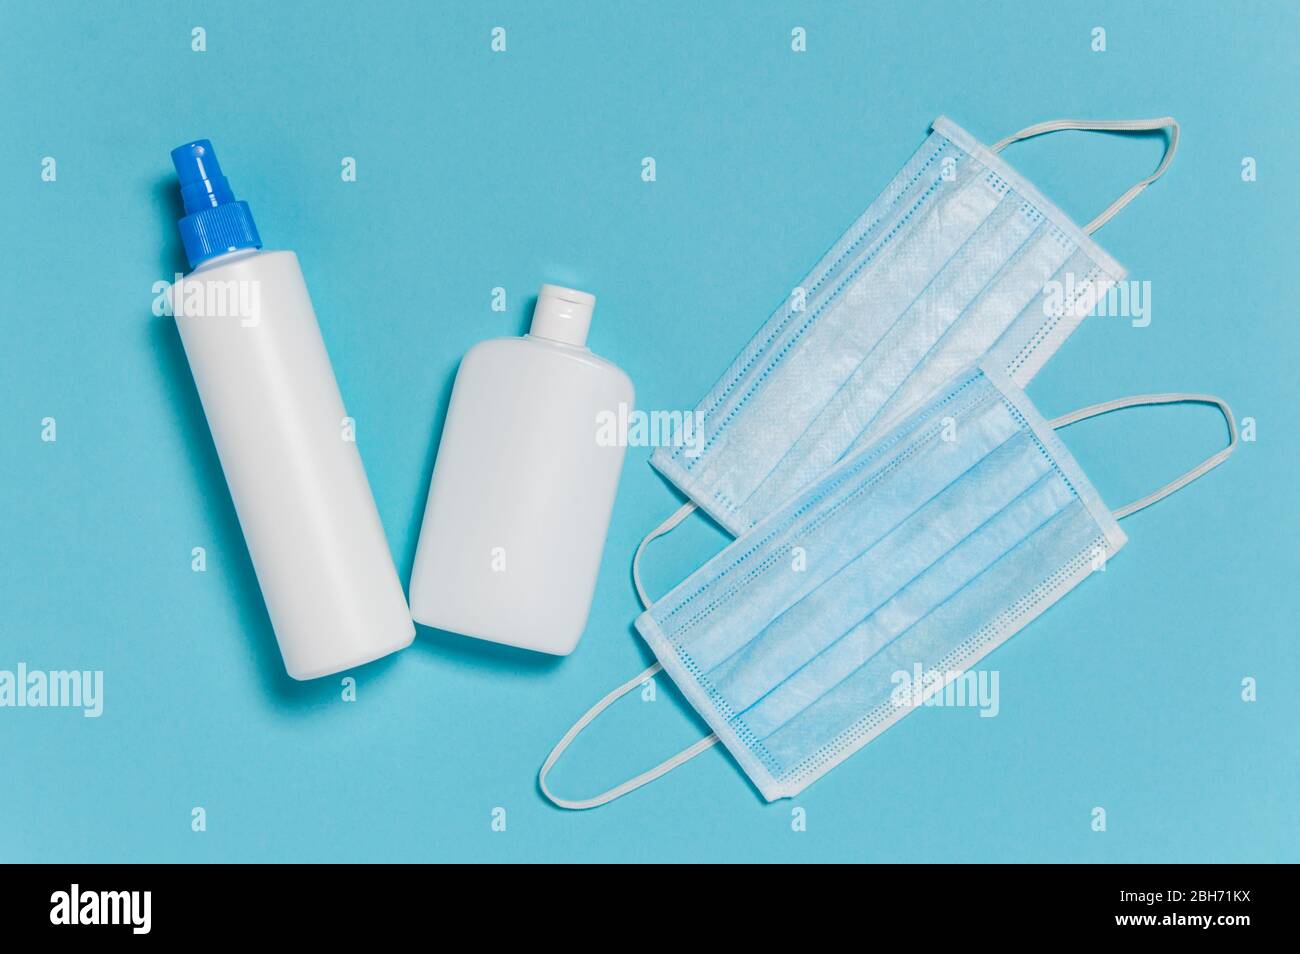 Coronavirus protection. Medical surgical masks and bottles of disinfectant and alcohol hand sanitizer on blue background. Hygiene measures to prevent Stock Photo